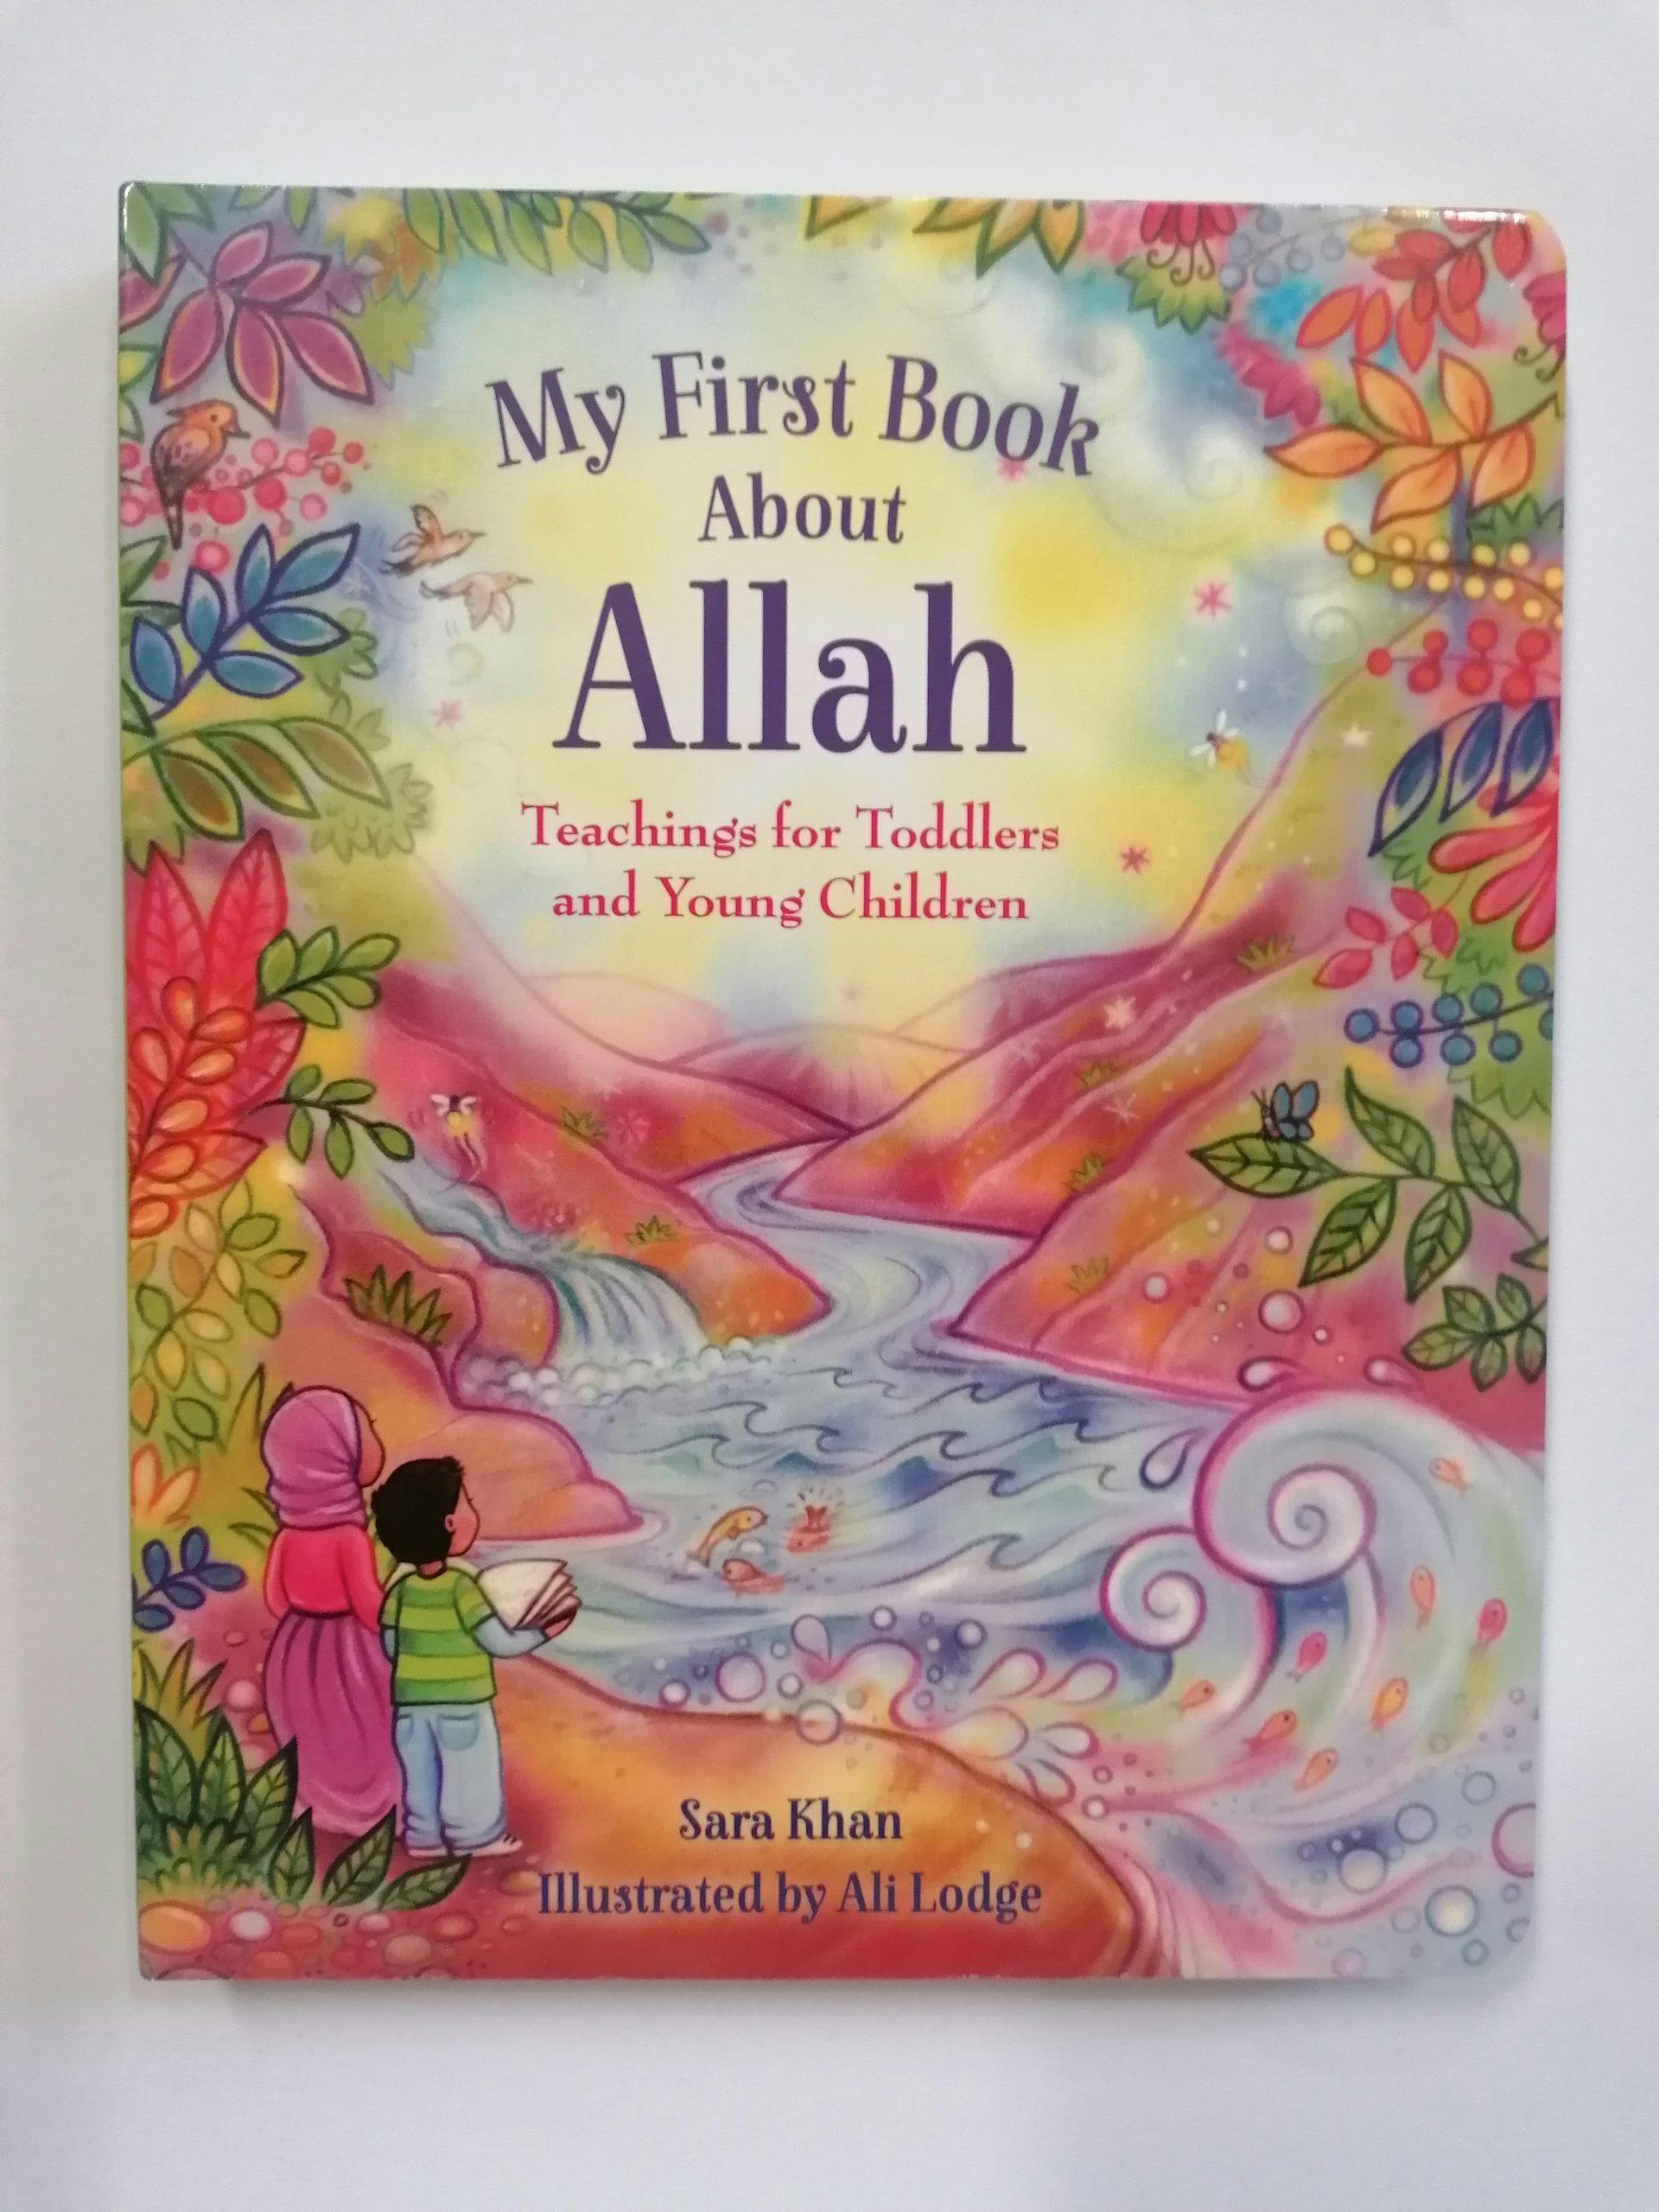 Featured image of My First Book About Allah